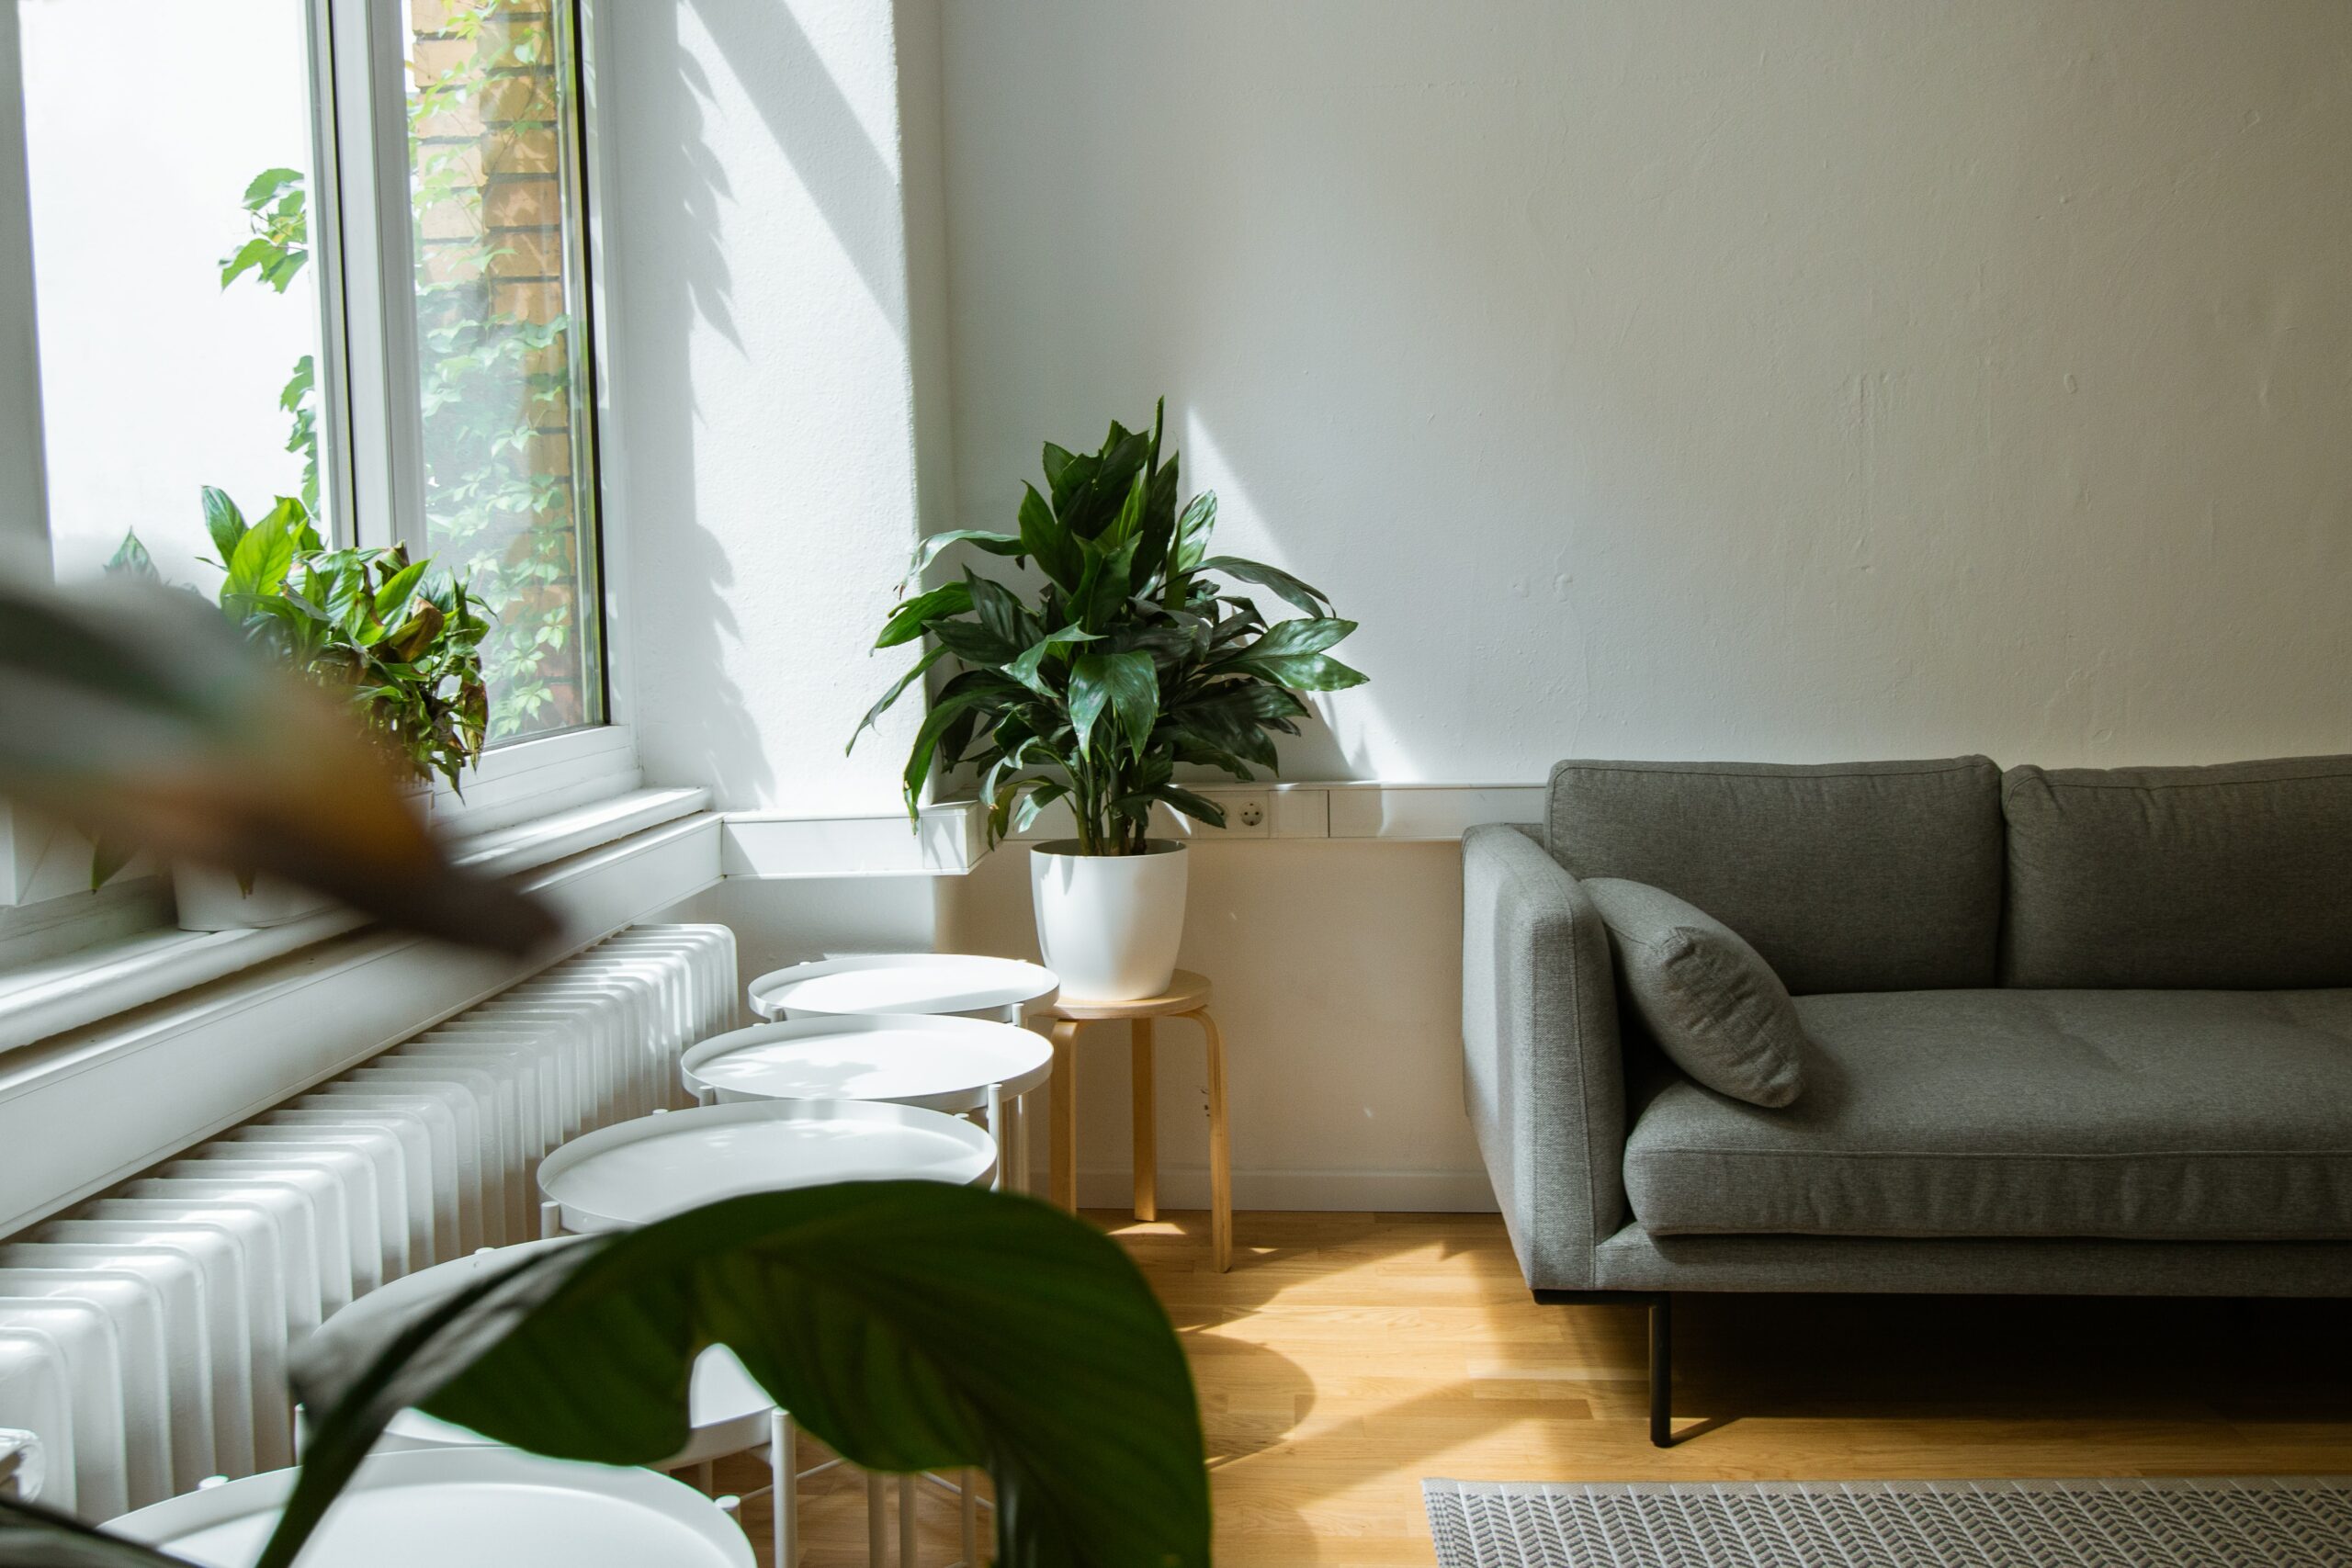 Front room of a house with sofa and plant